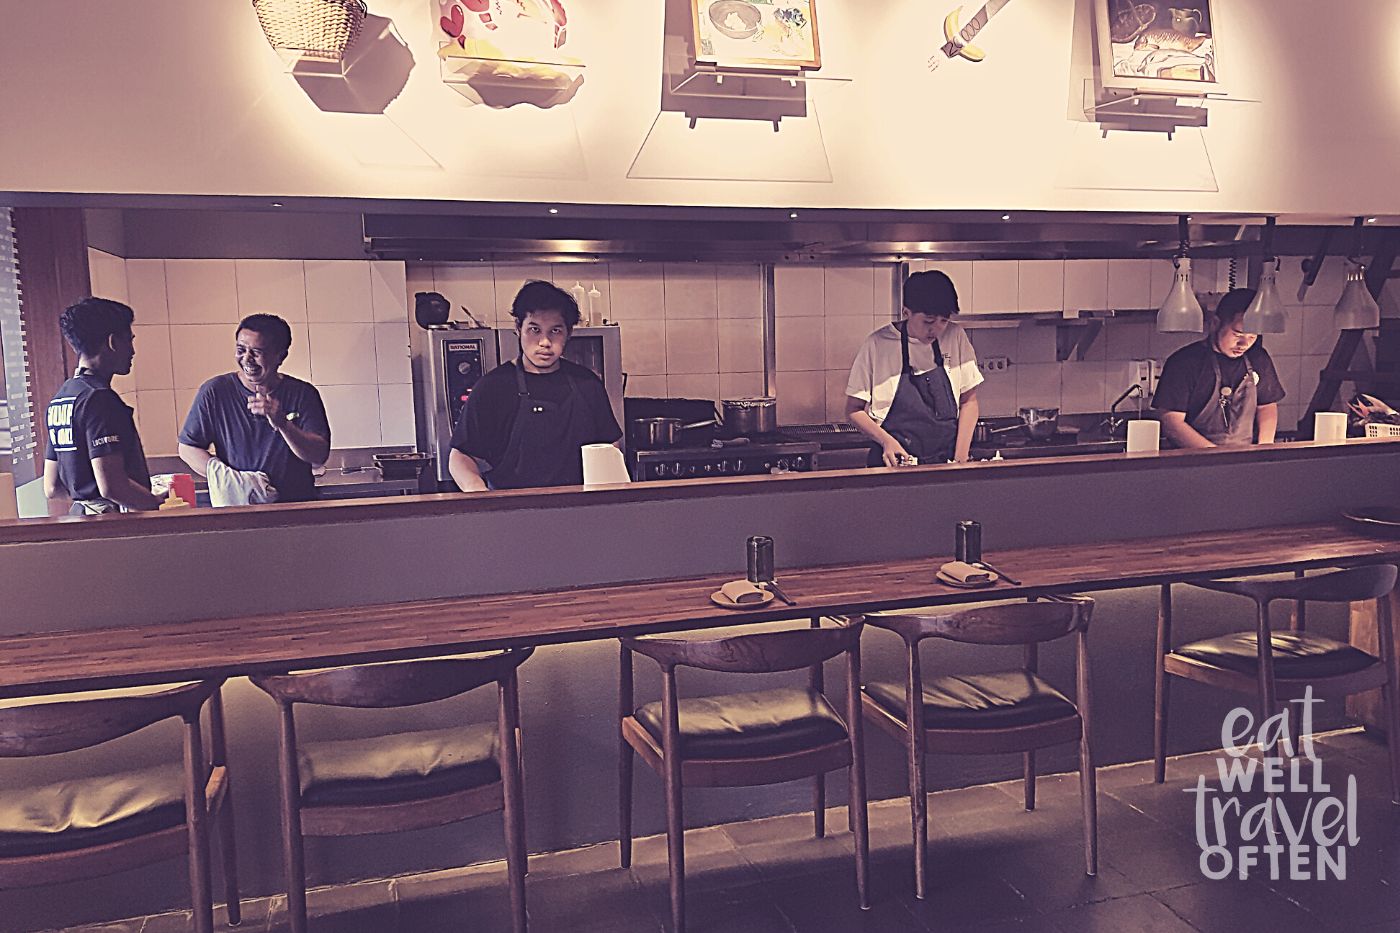 Several male chefs hard at work in the restaurant kitchen